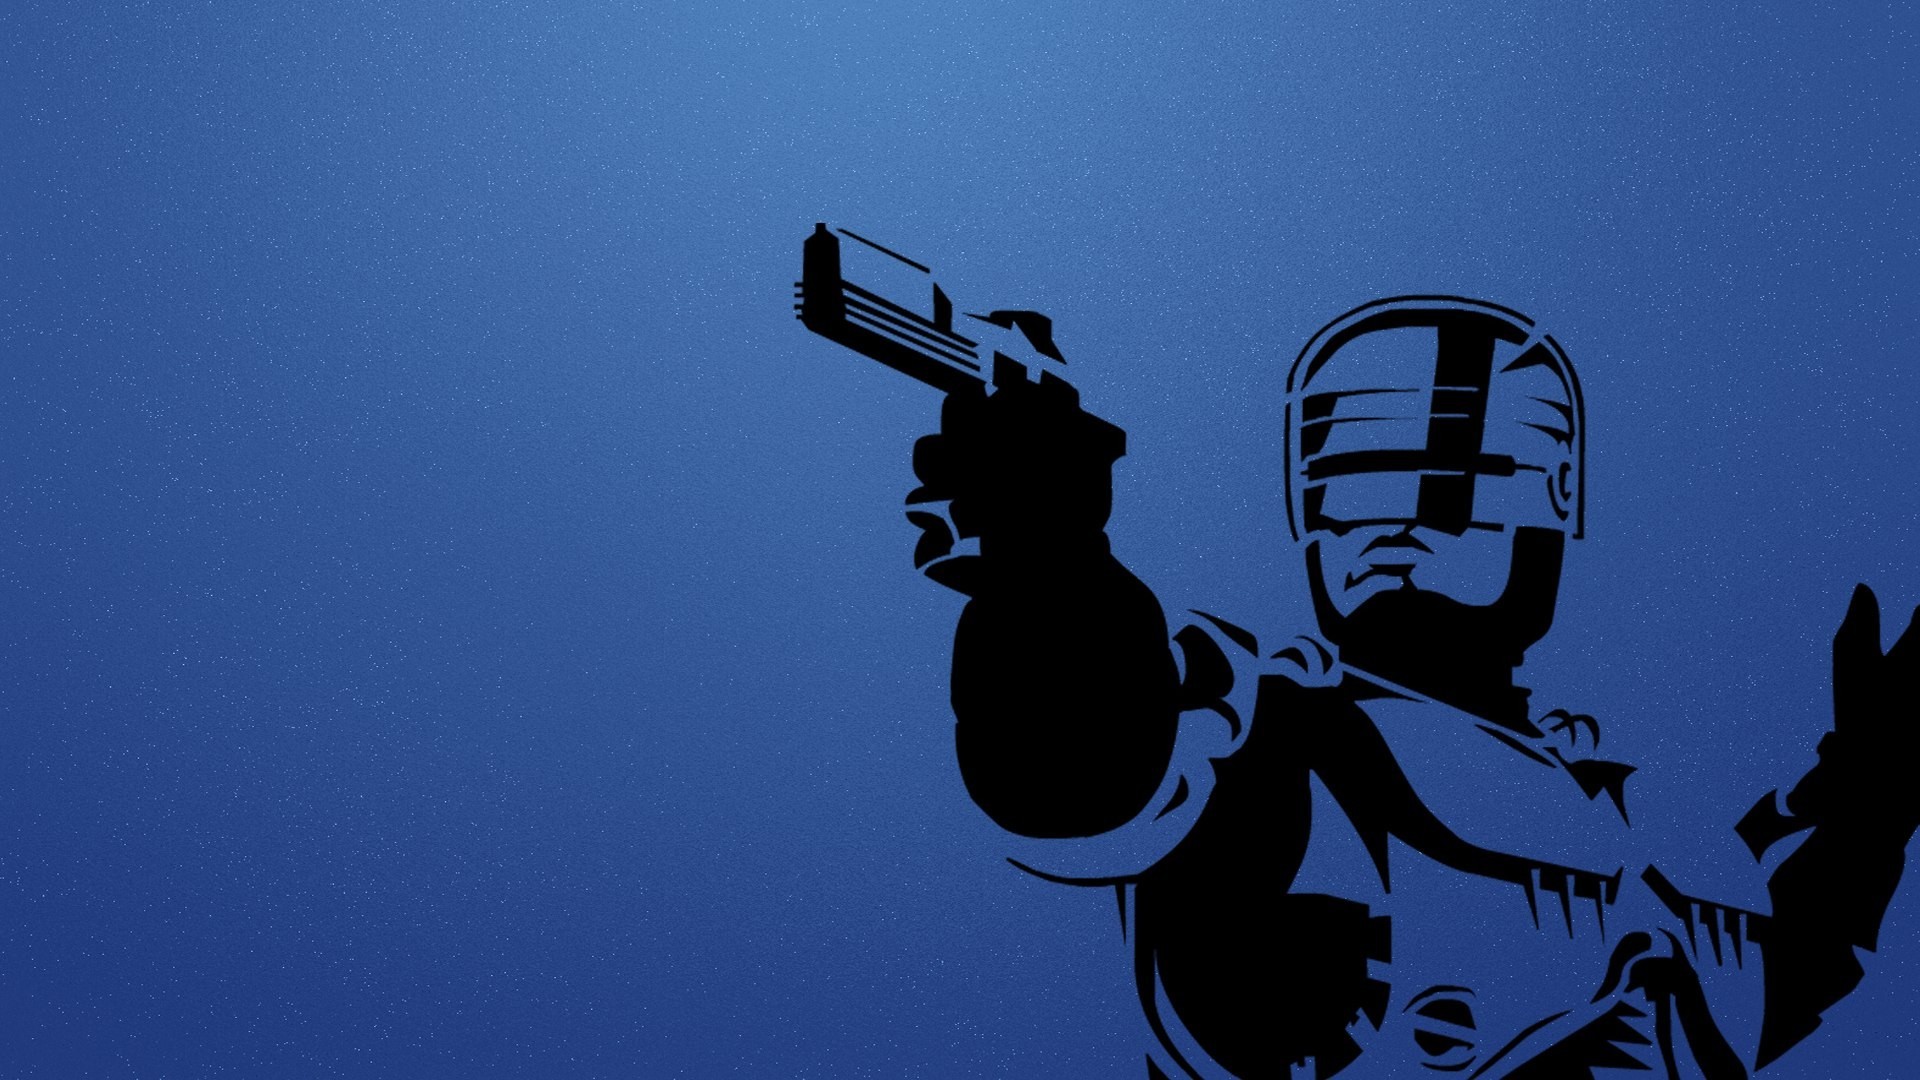 General 1920x1080 RoboCop movies artwork cyborg weapon science fiction simple background blue background aiming armor machine men